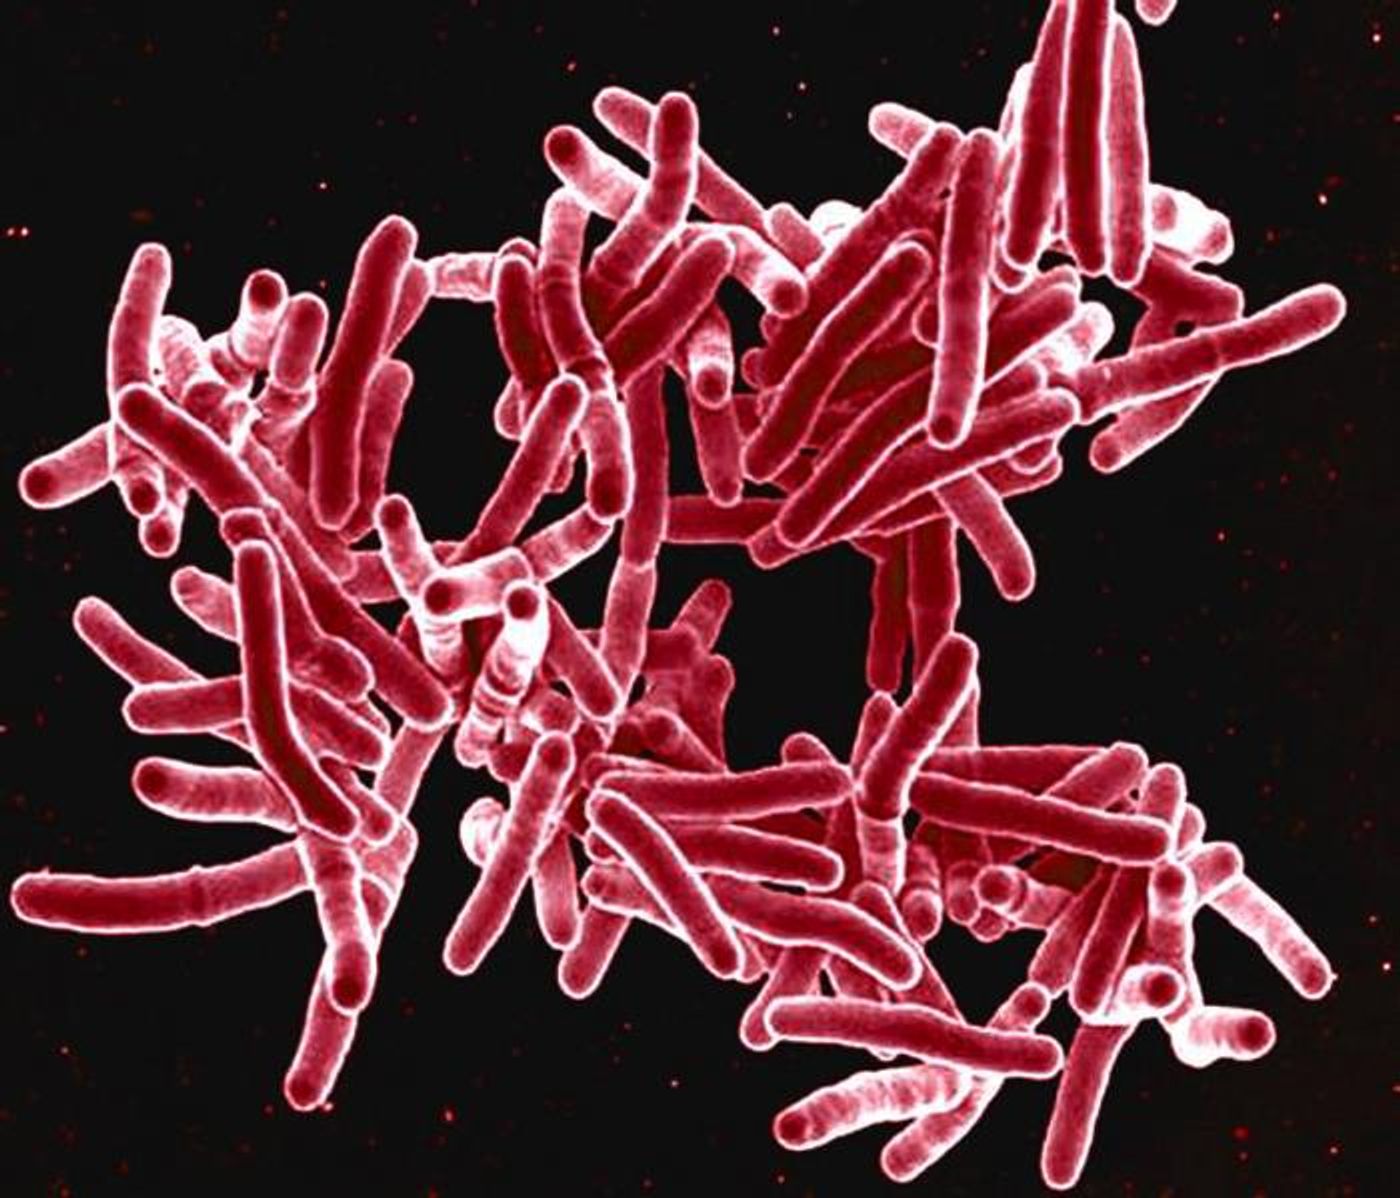 Colorized scanning electron microscopic (SEM) image of red colored, rod shaped, Mycobacterium tuberculosis bacteria, which cause tuberculosis (TB) in human beings. / Credit: National Institute of Allergy and Infectious Diseases